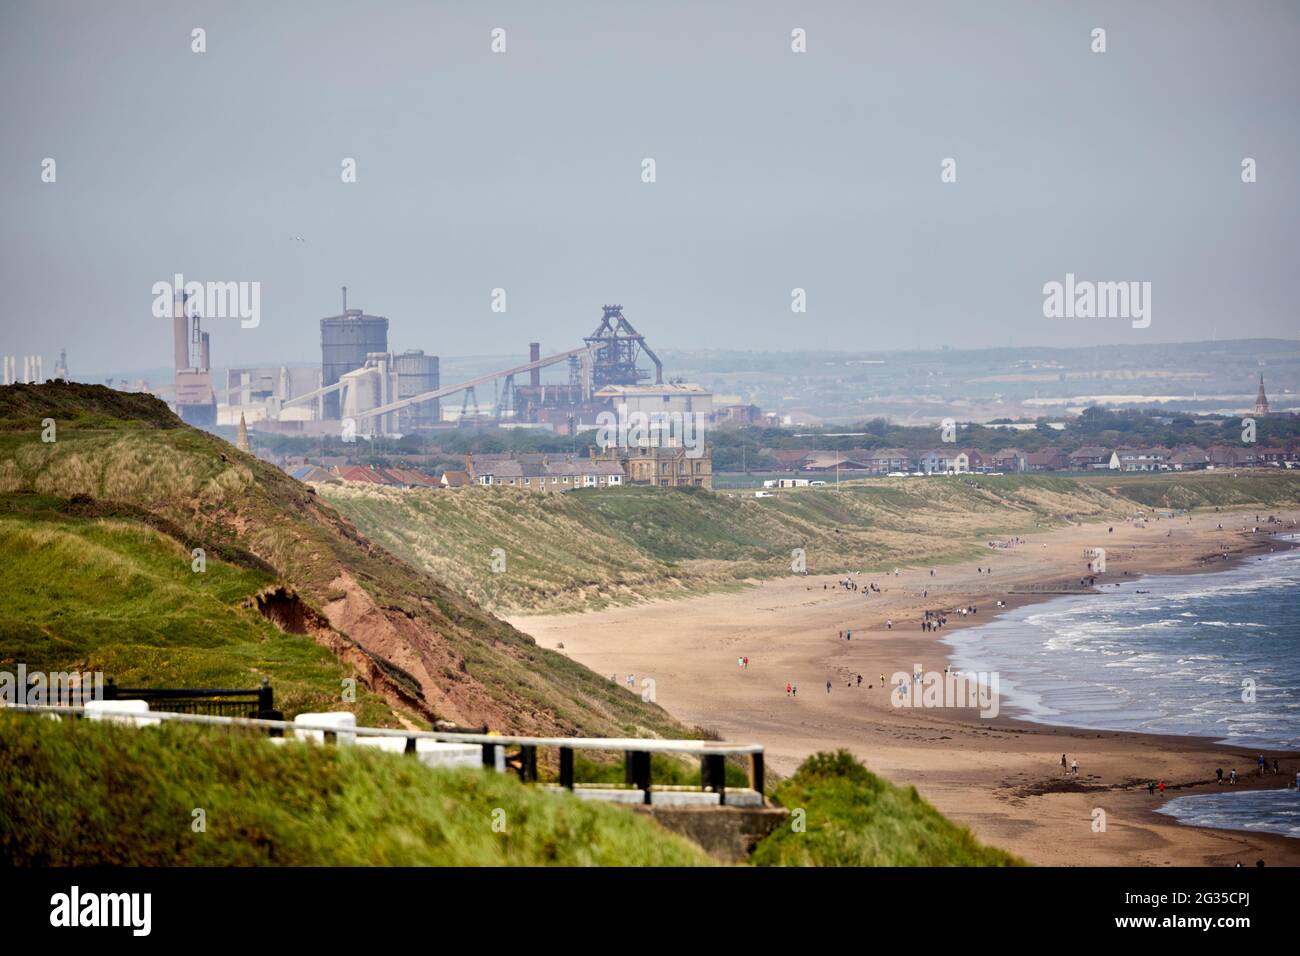 The former SSI Steelworks in Redcar, Redcar steelworks Cleveland, North Yorkshire, England Stock Photo